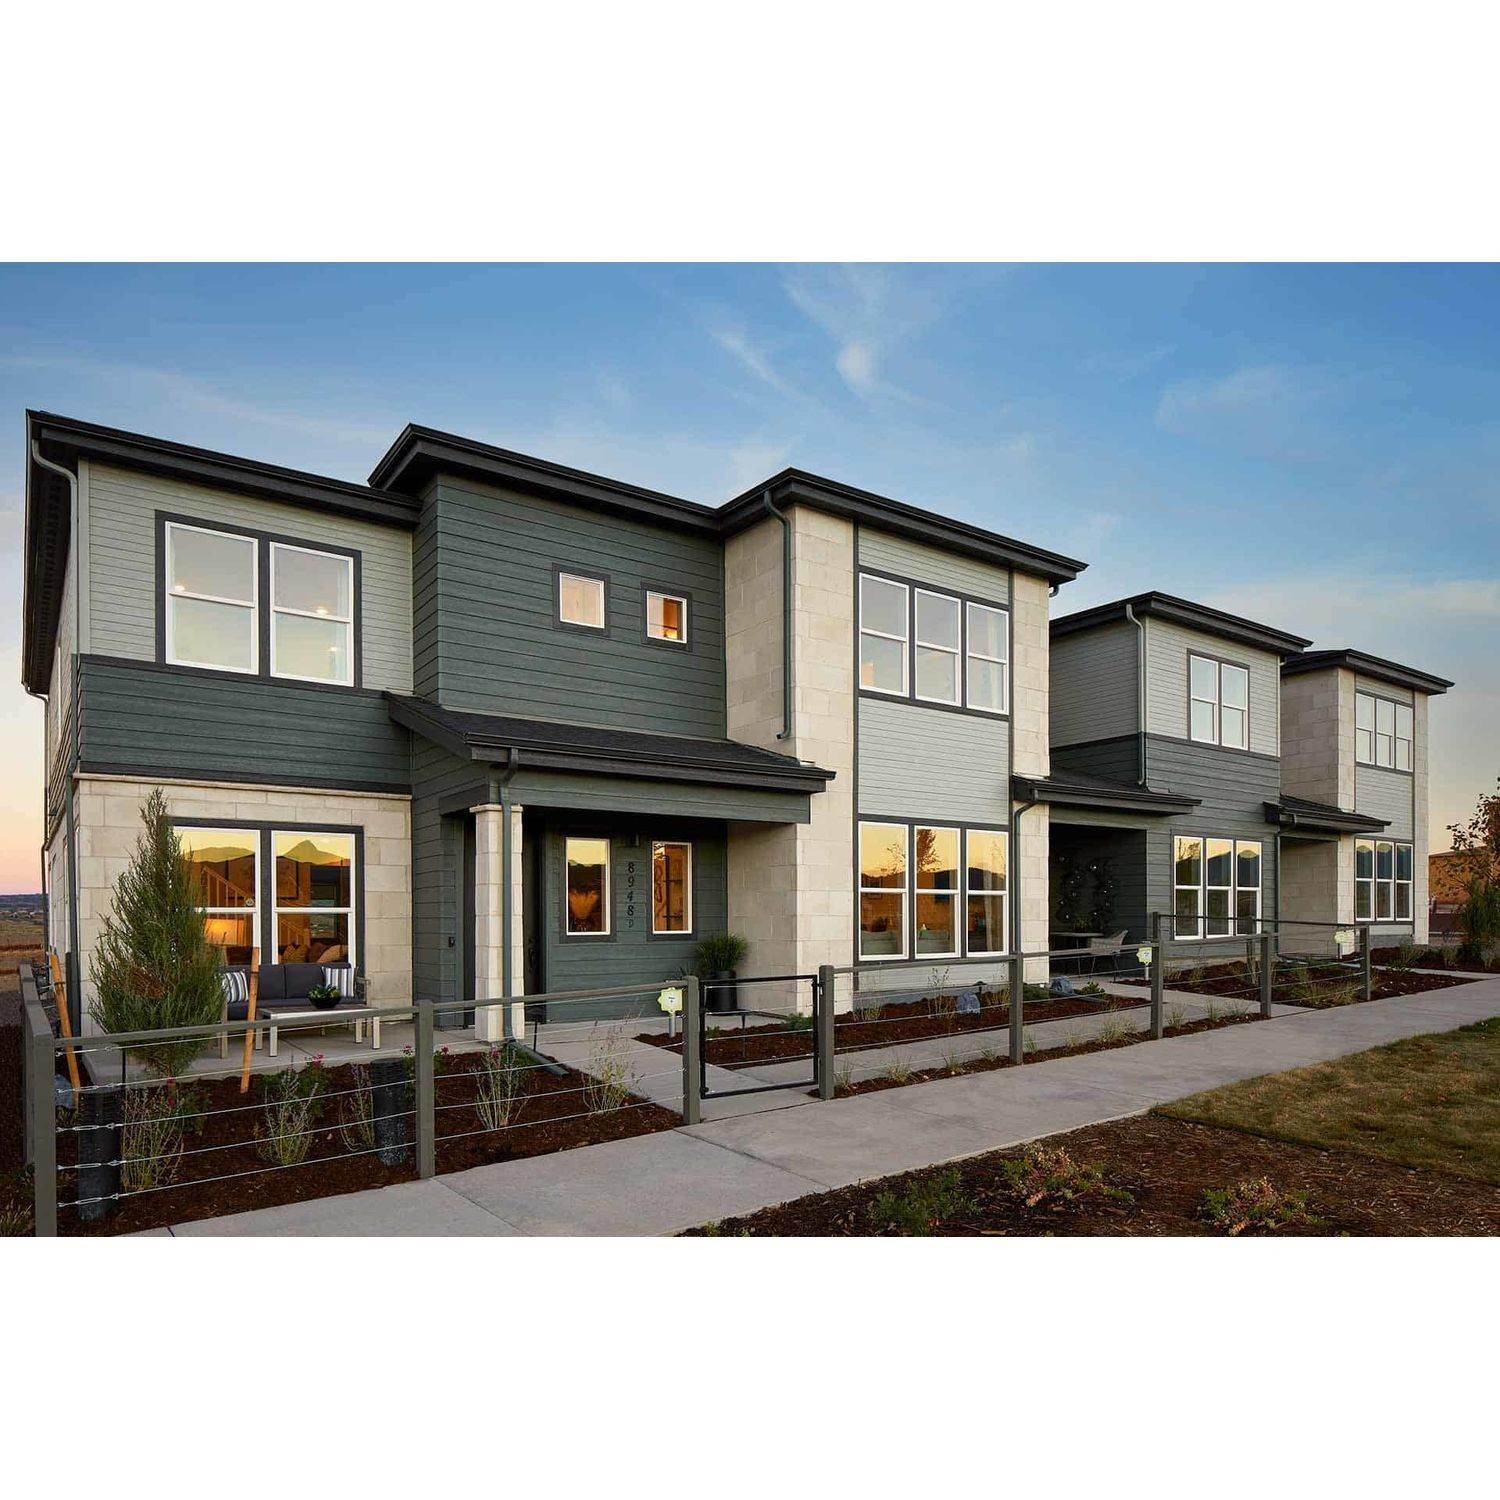 18. Sterling Ranch Townhomes edificio a 8941 Fraser River St., Littleton, CO 80125